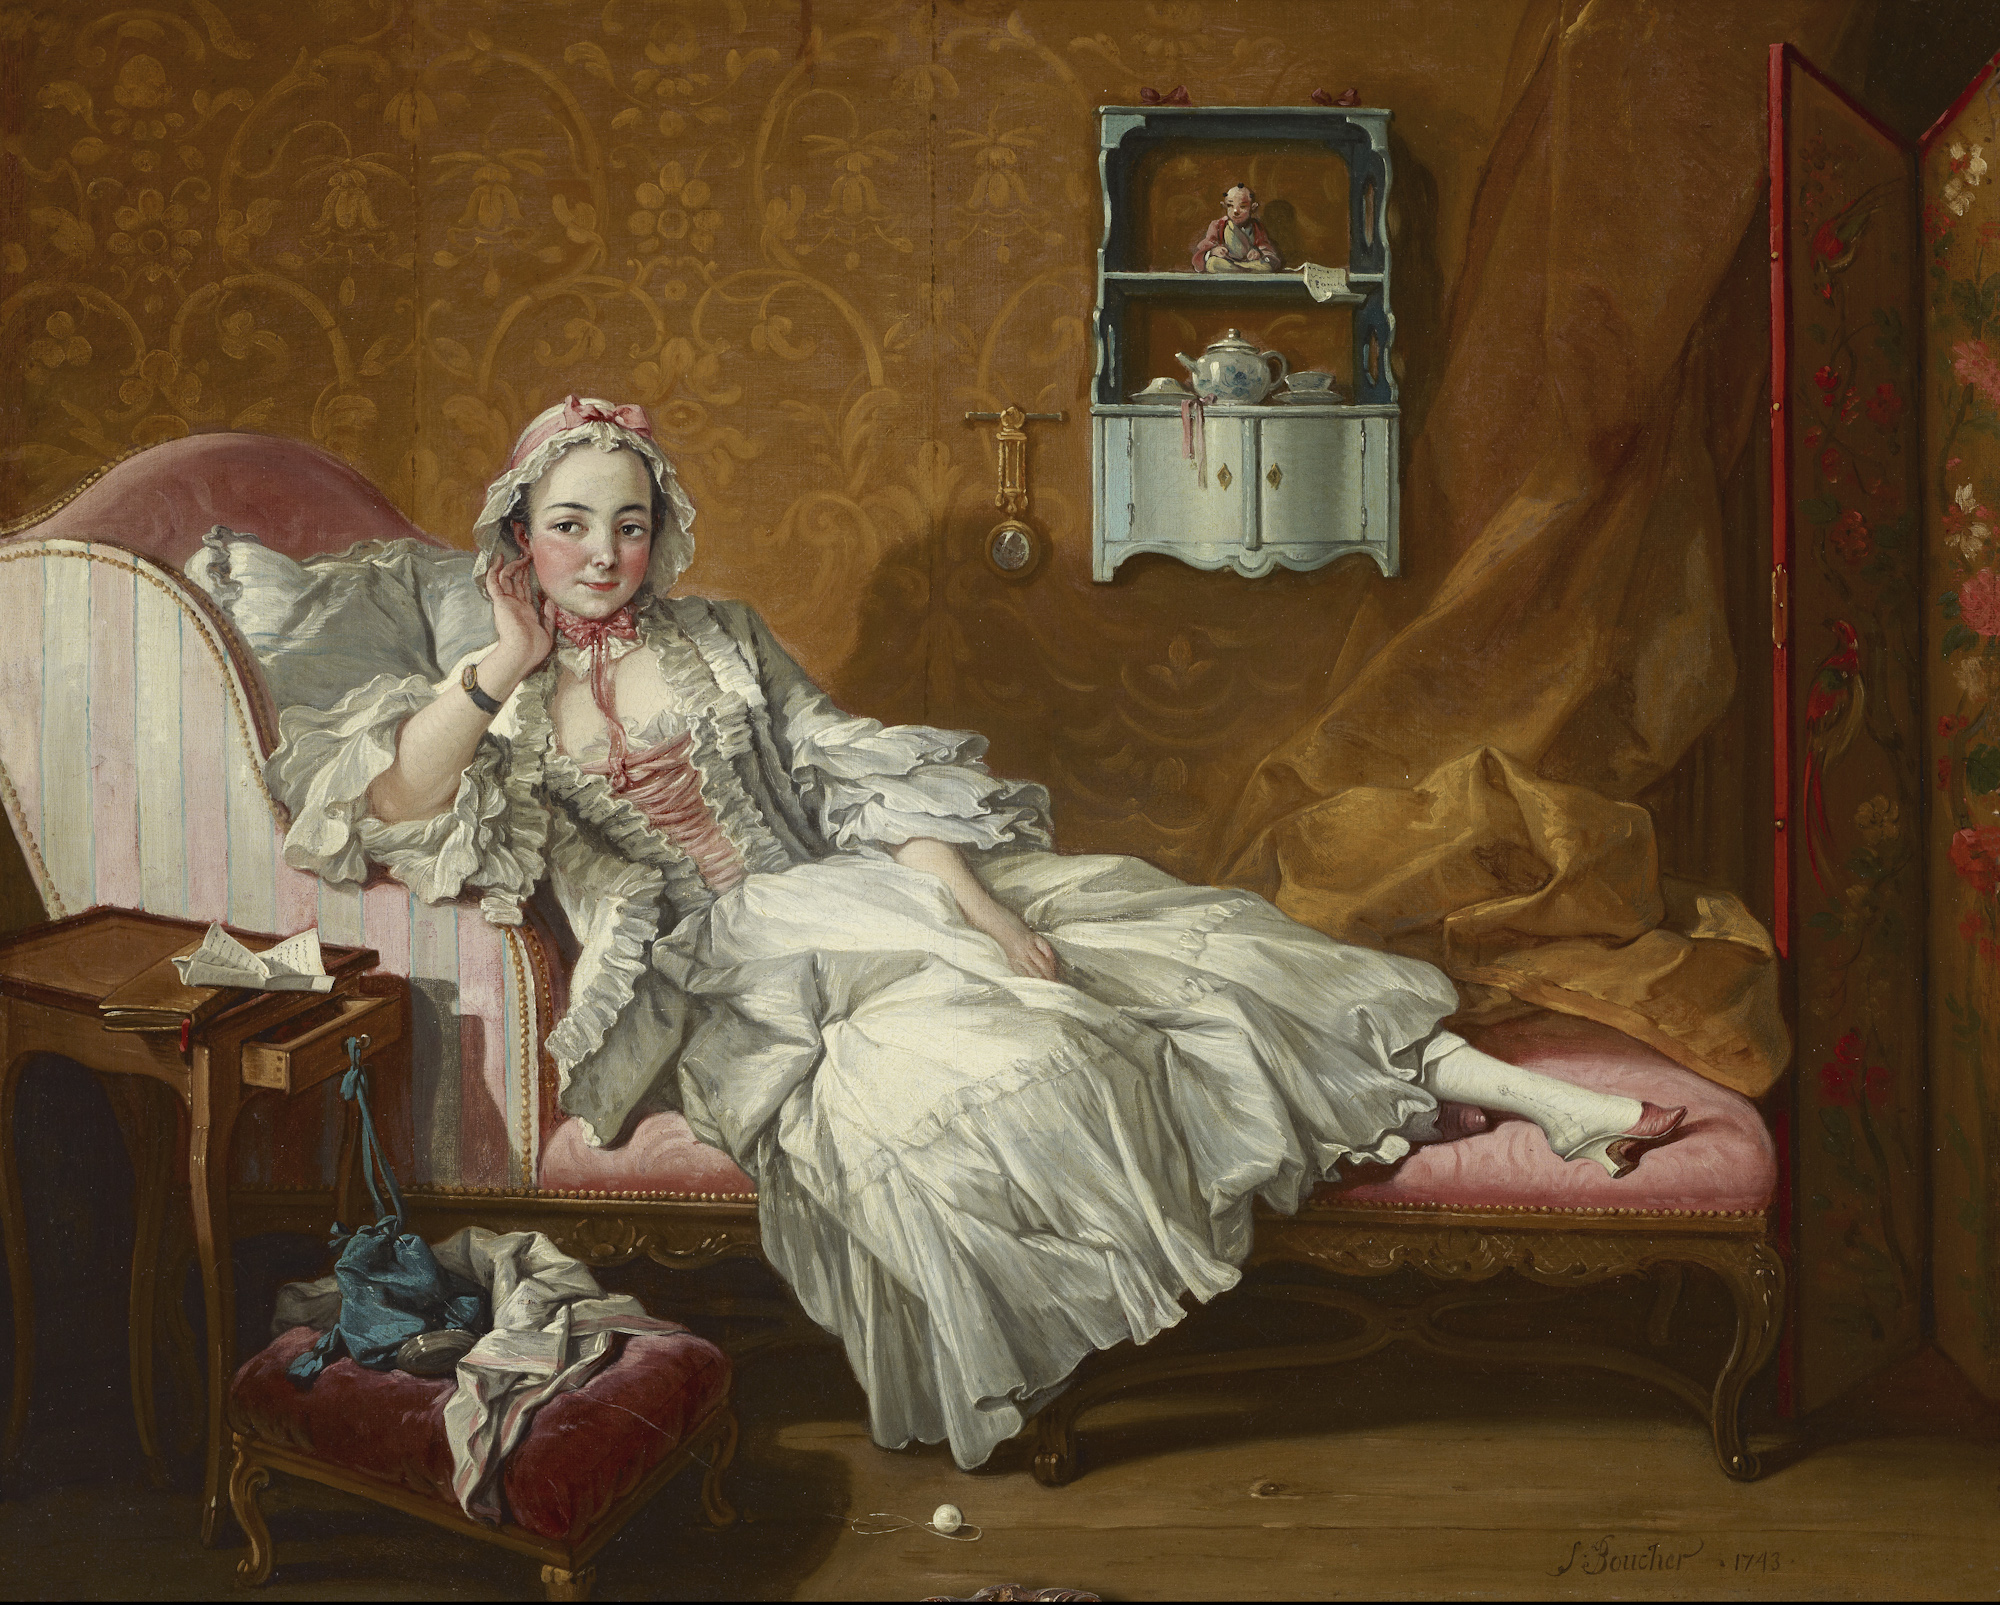 A Lady on Her Day Bed by Francois Boucher - 1743 - 57.2 × 68.3 cm The Frick Collection